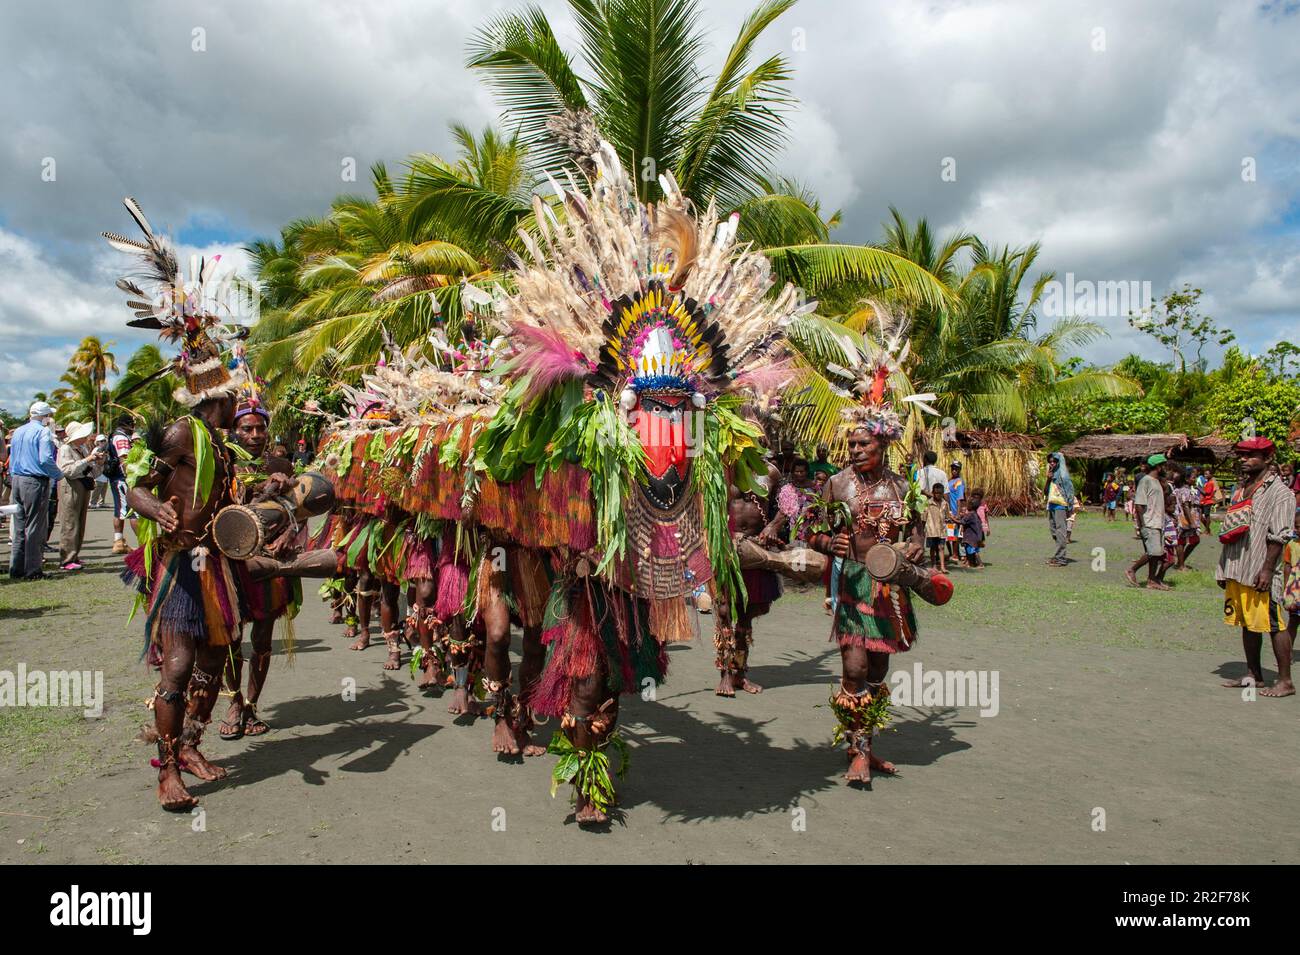 Men in colorful costumes perform a folklore dance to greet passengers on an expedition cruise ship, Kopar, East Sepik Province, Papua New Guinea, Sout Stock Photo